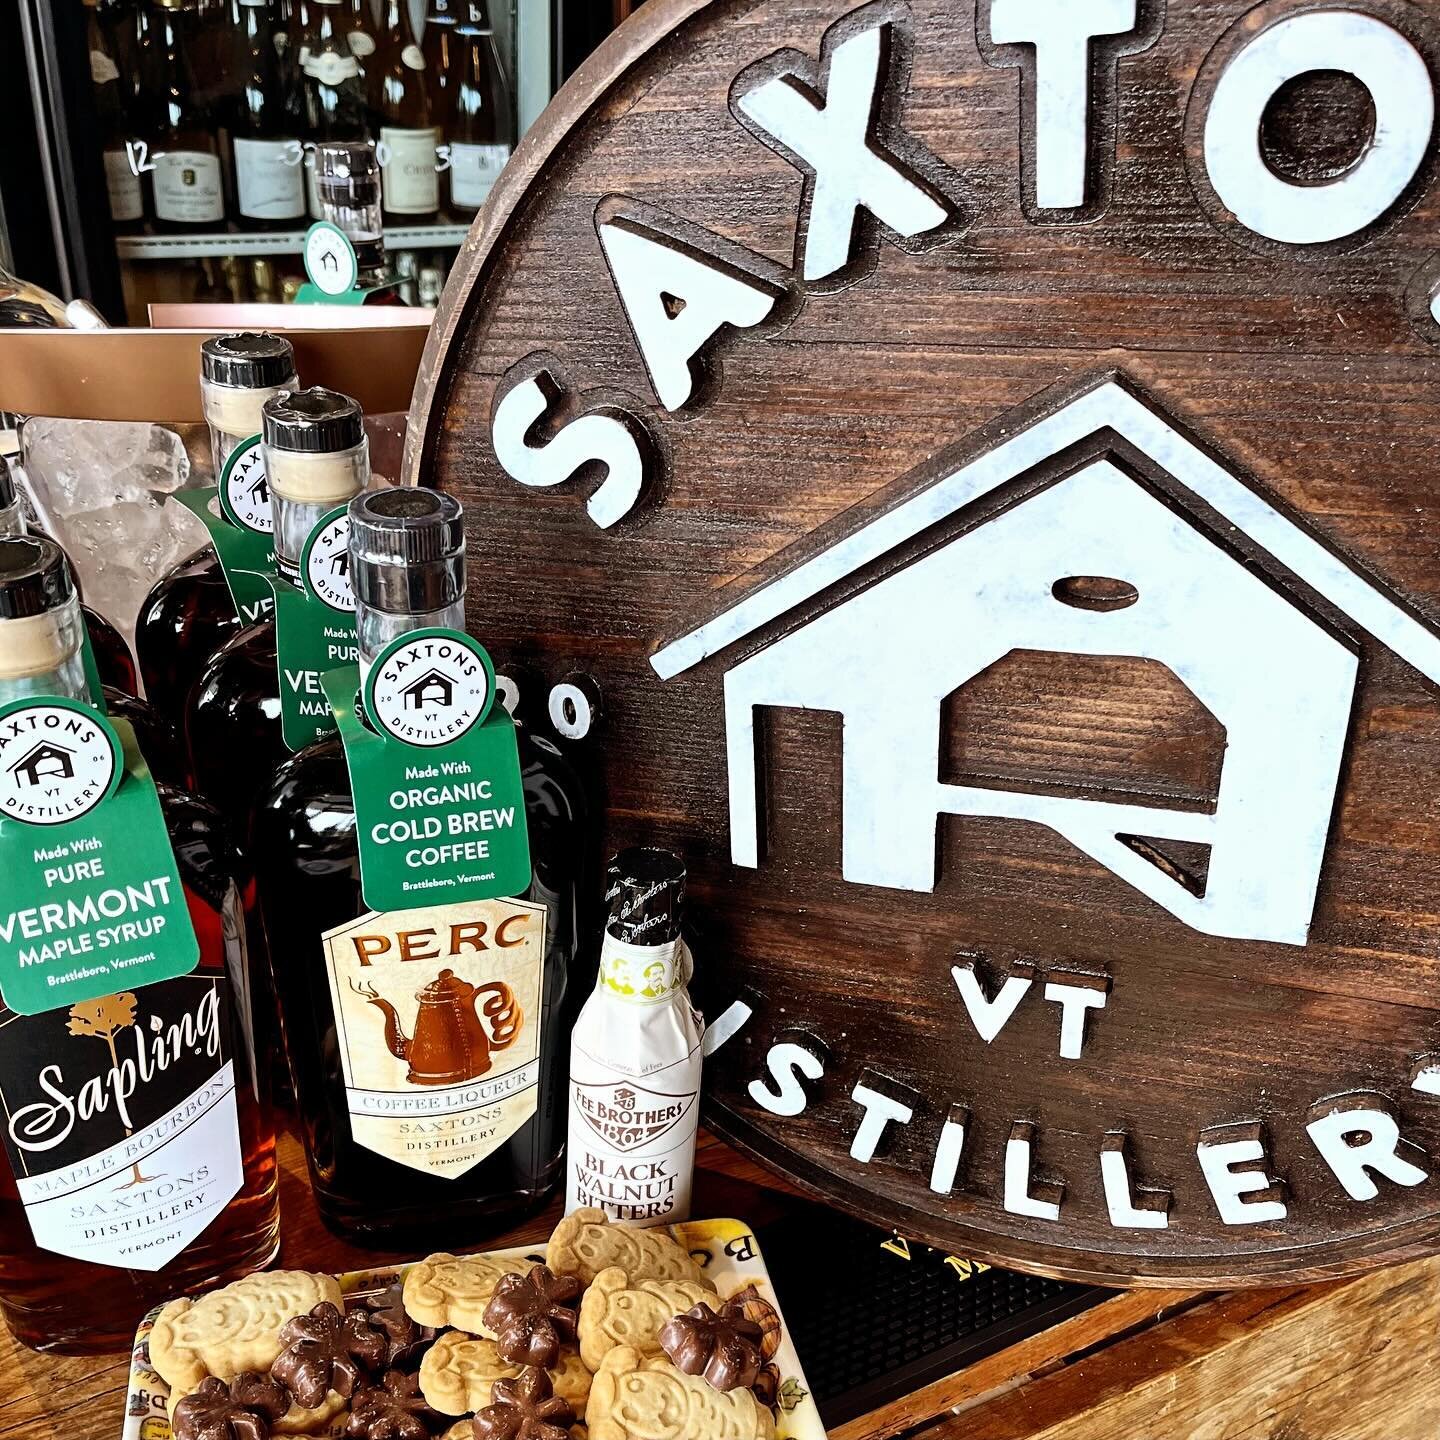 Perc up with an Espresso Martini &amp; a Knotty Crown with @saxtonsdistillery 
3-6pm free Friday tasting!!!!